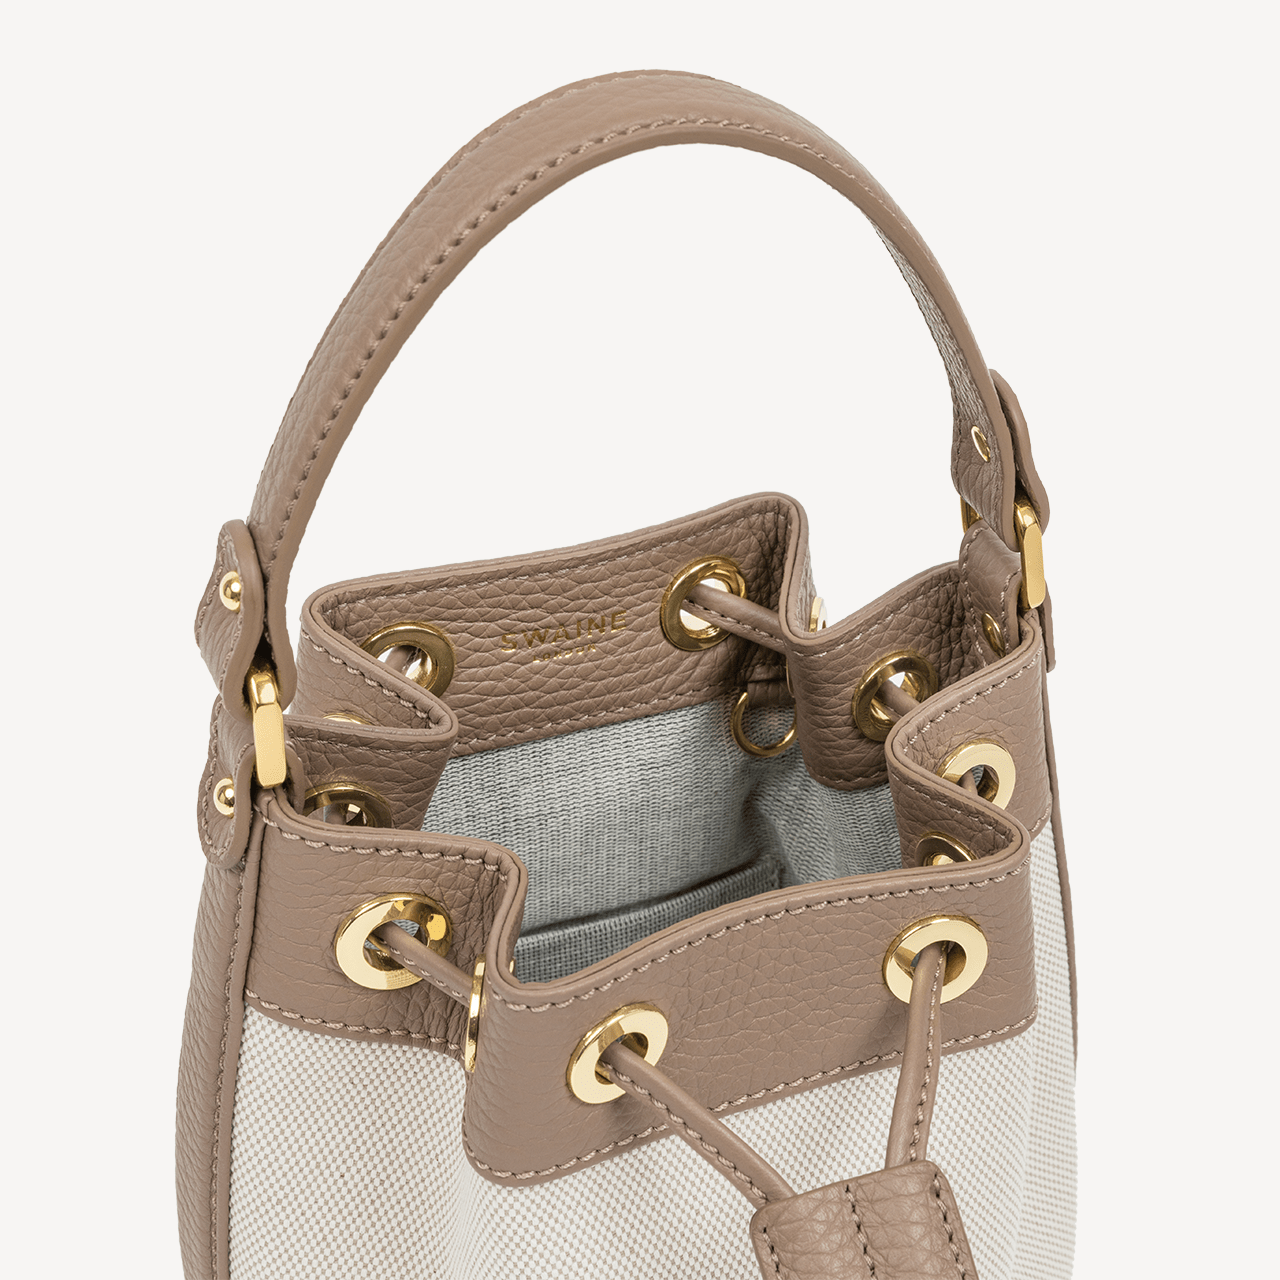 Pouch Bag - Taupe Pebble & Beige Canvas - Swaine